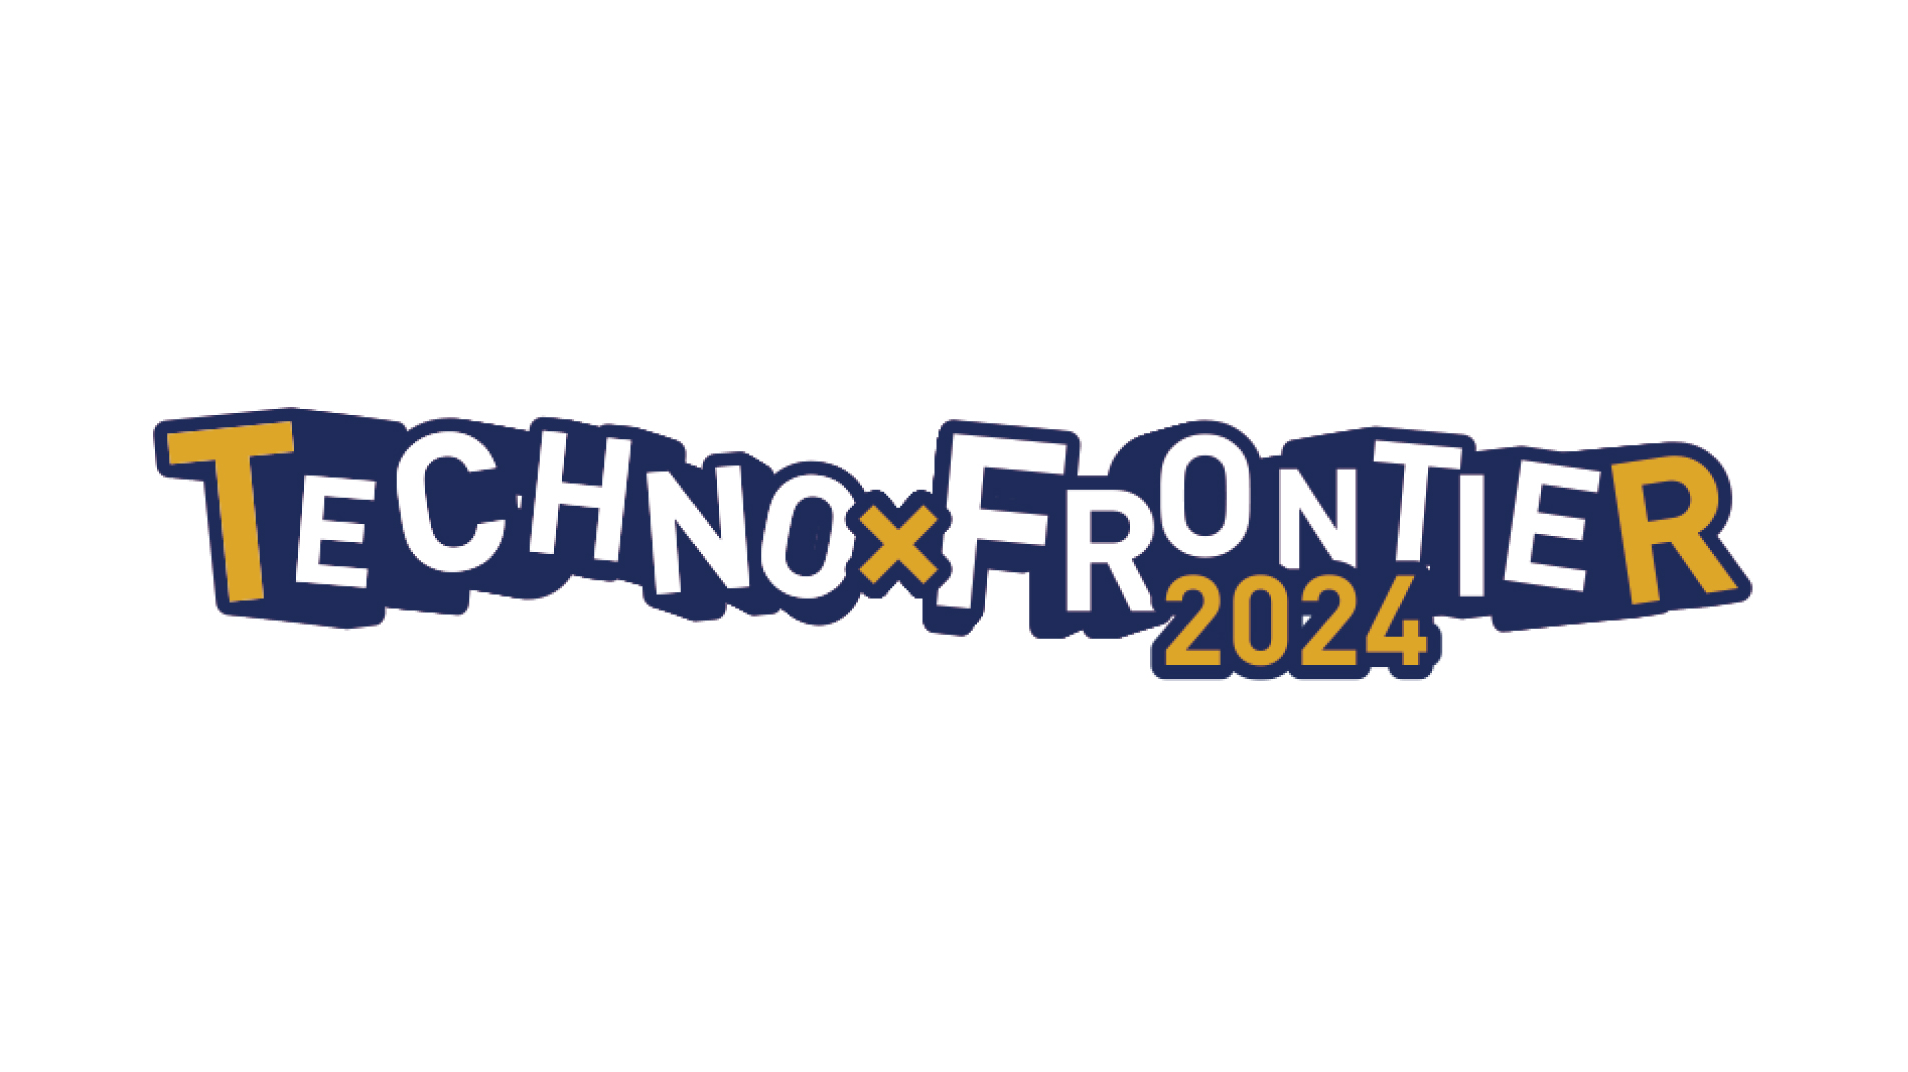 Logo of the trade fair Techno Frontier 2024 in Japan written in purple and yellow.